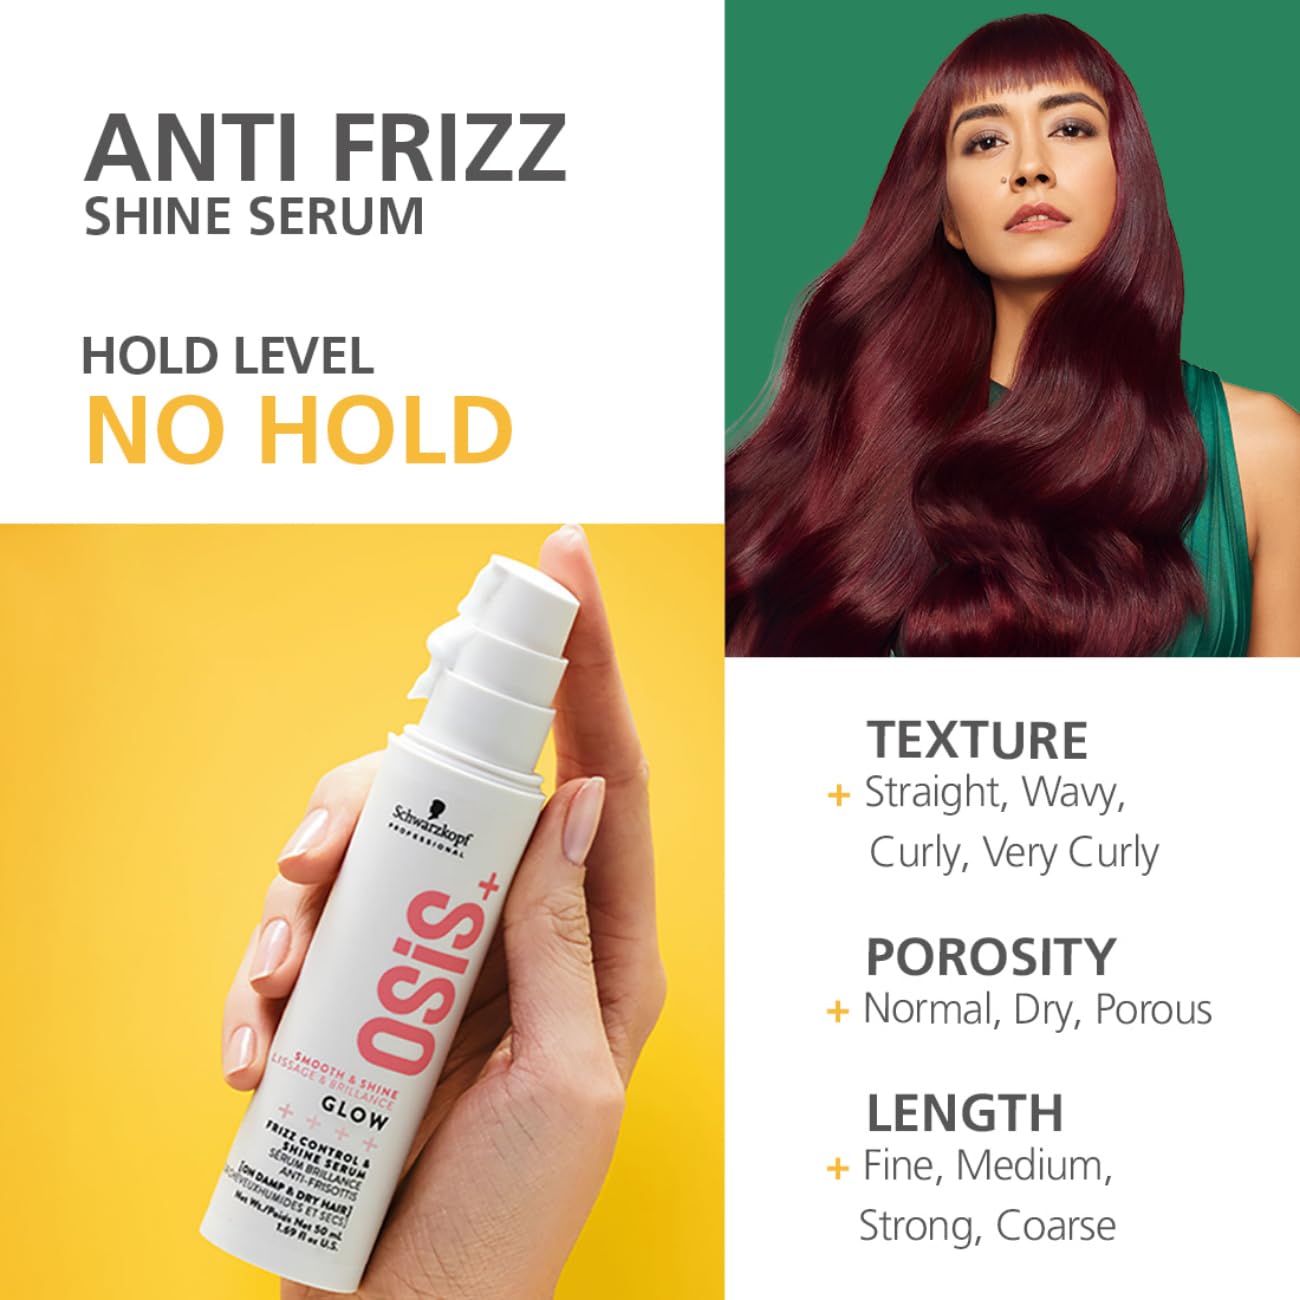 A hair serum that helps calm frizz and style your hair with shine.